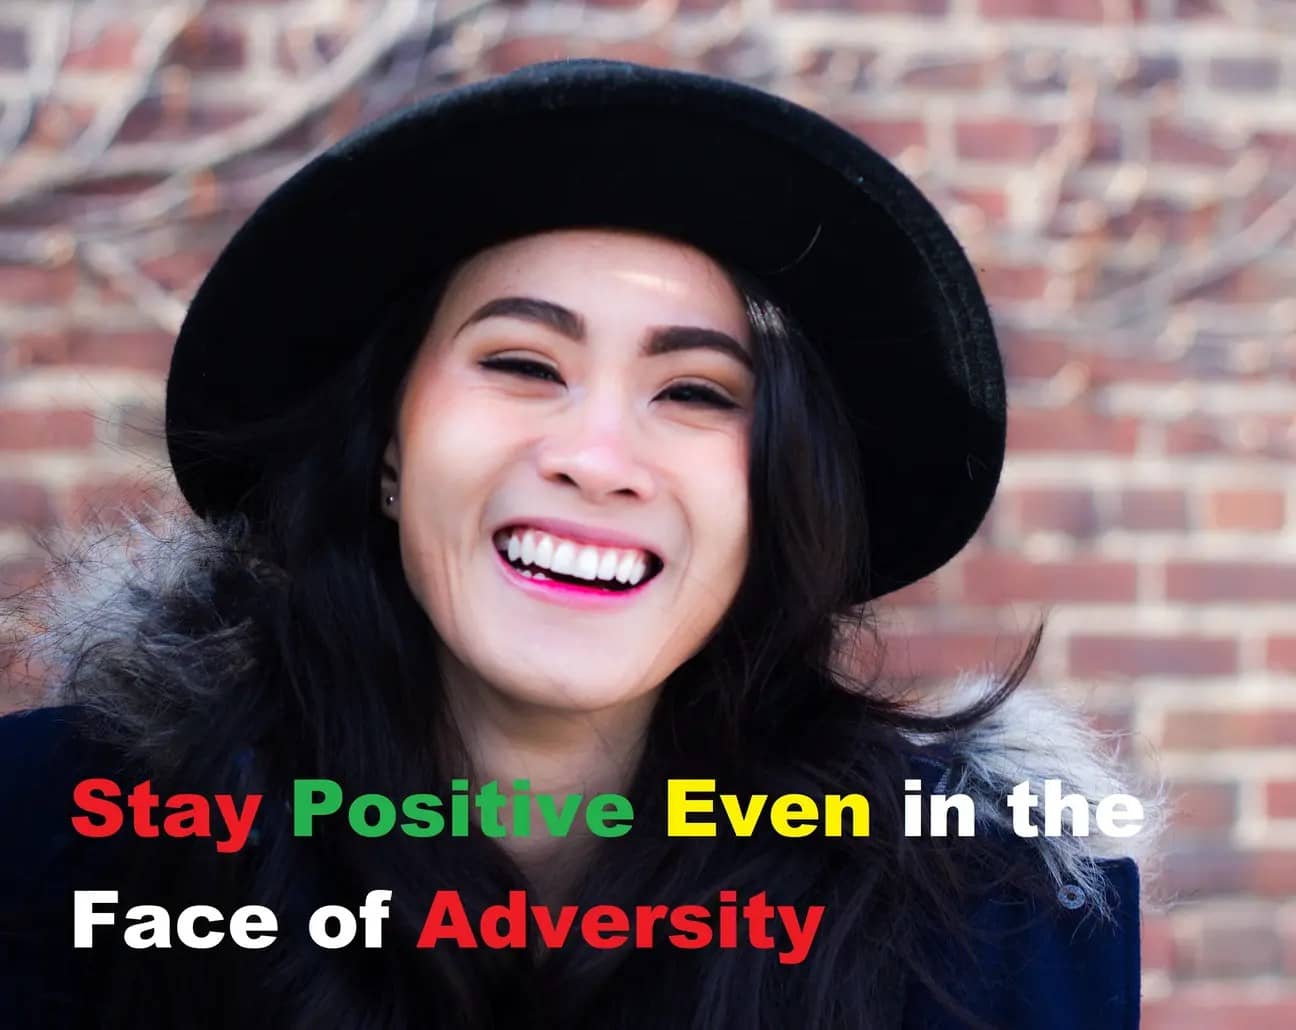 Stay Positive Even in the Face of Adversity